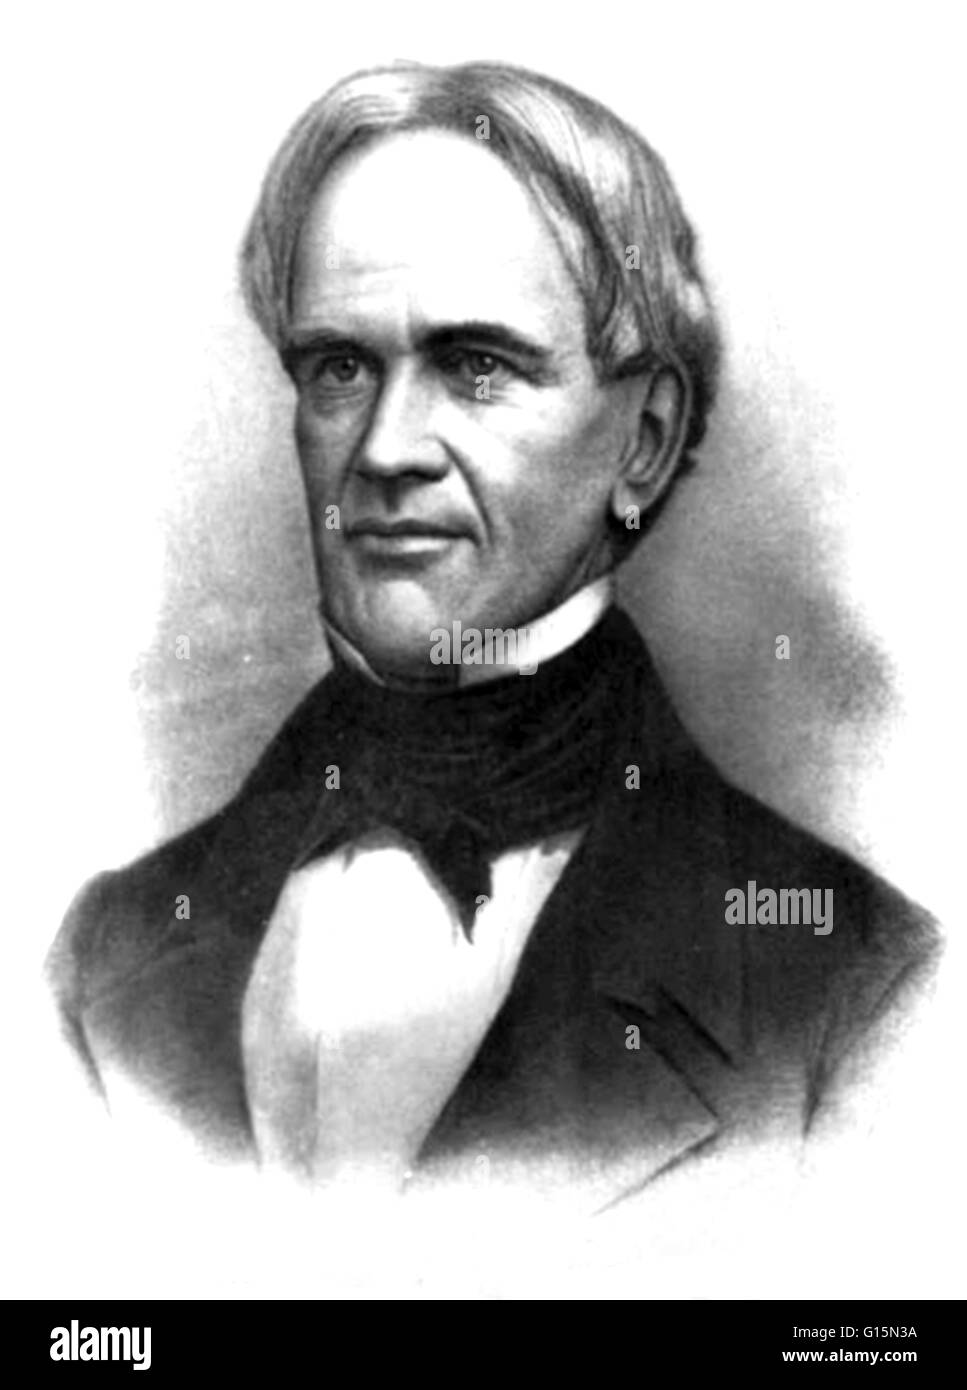 Horace Mann (May 4, 1796 - August 2, 1859) was an American education reformer. As a politician he served in the Massachusetts House of Representatives from 1827 to 1833. He served in the Massachusetts Senate from 1834 to 1837. In 1848, after serving as Se Stock Photo